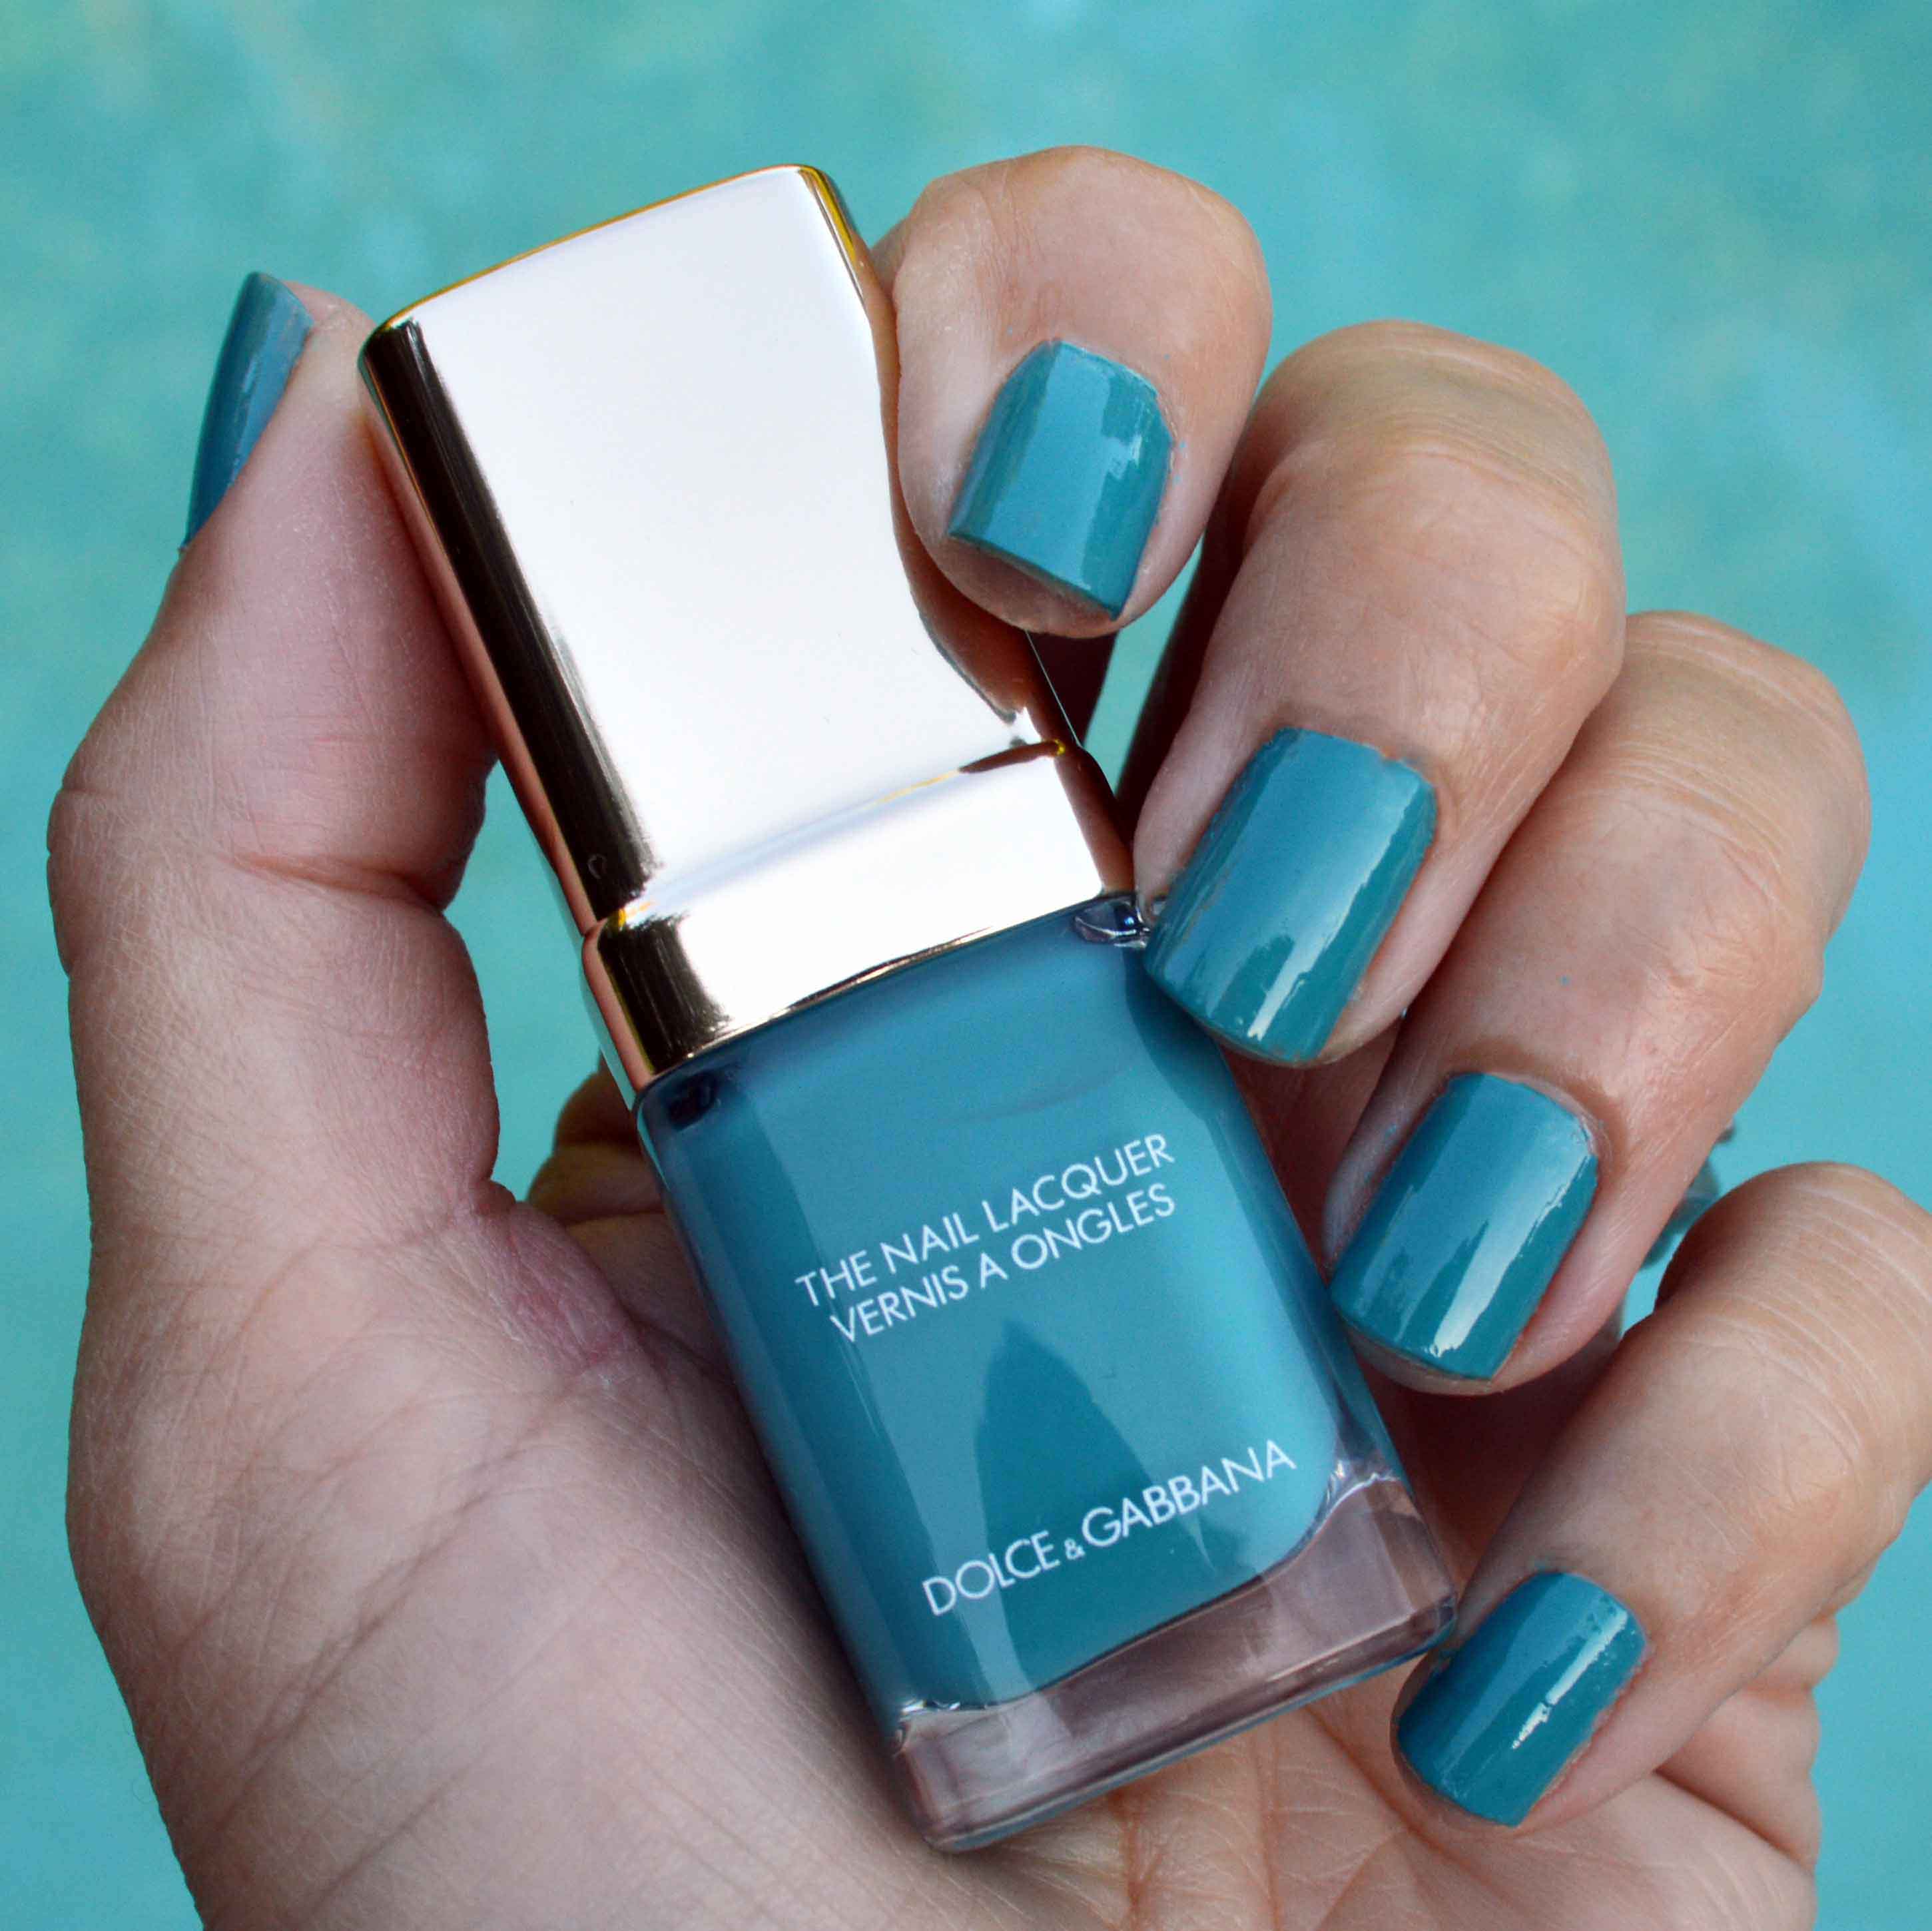 dolce and gabbana turquoise nail polish for summer 2016